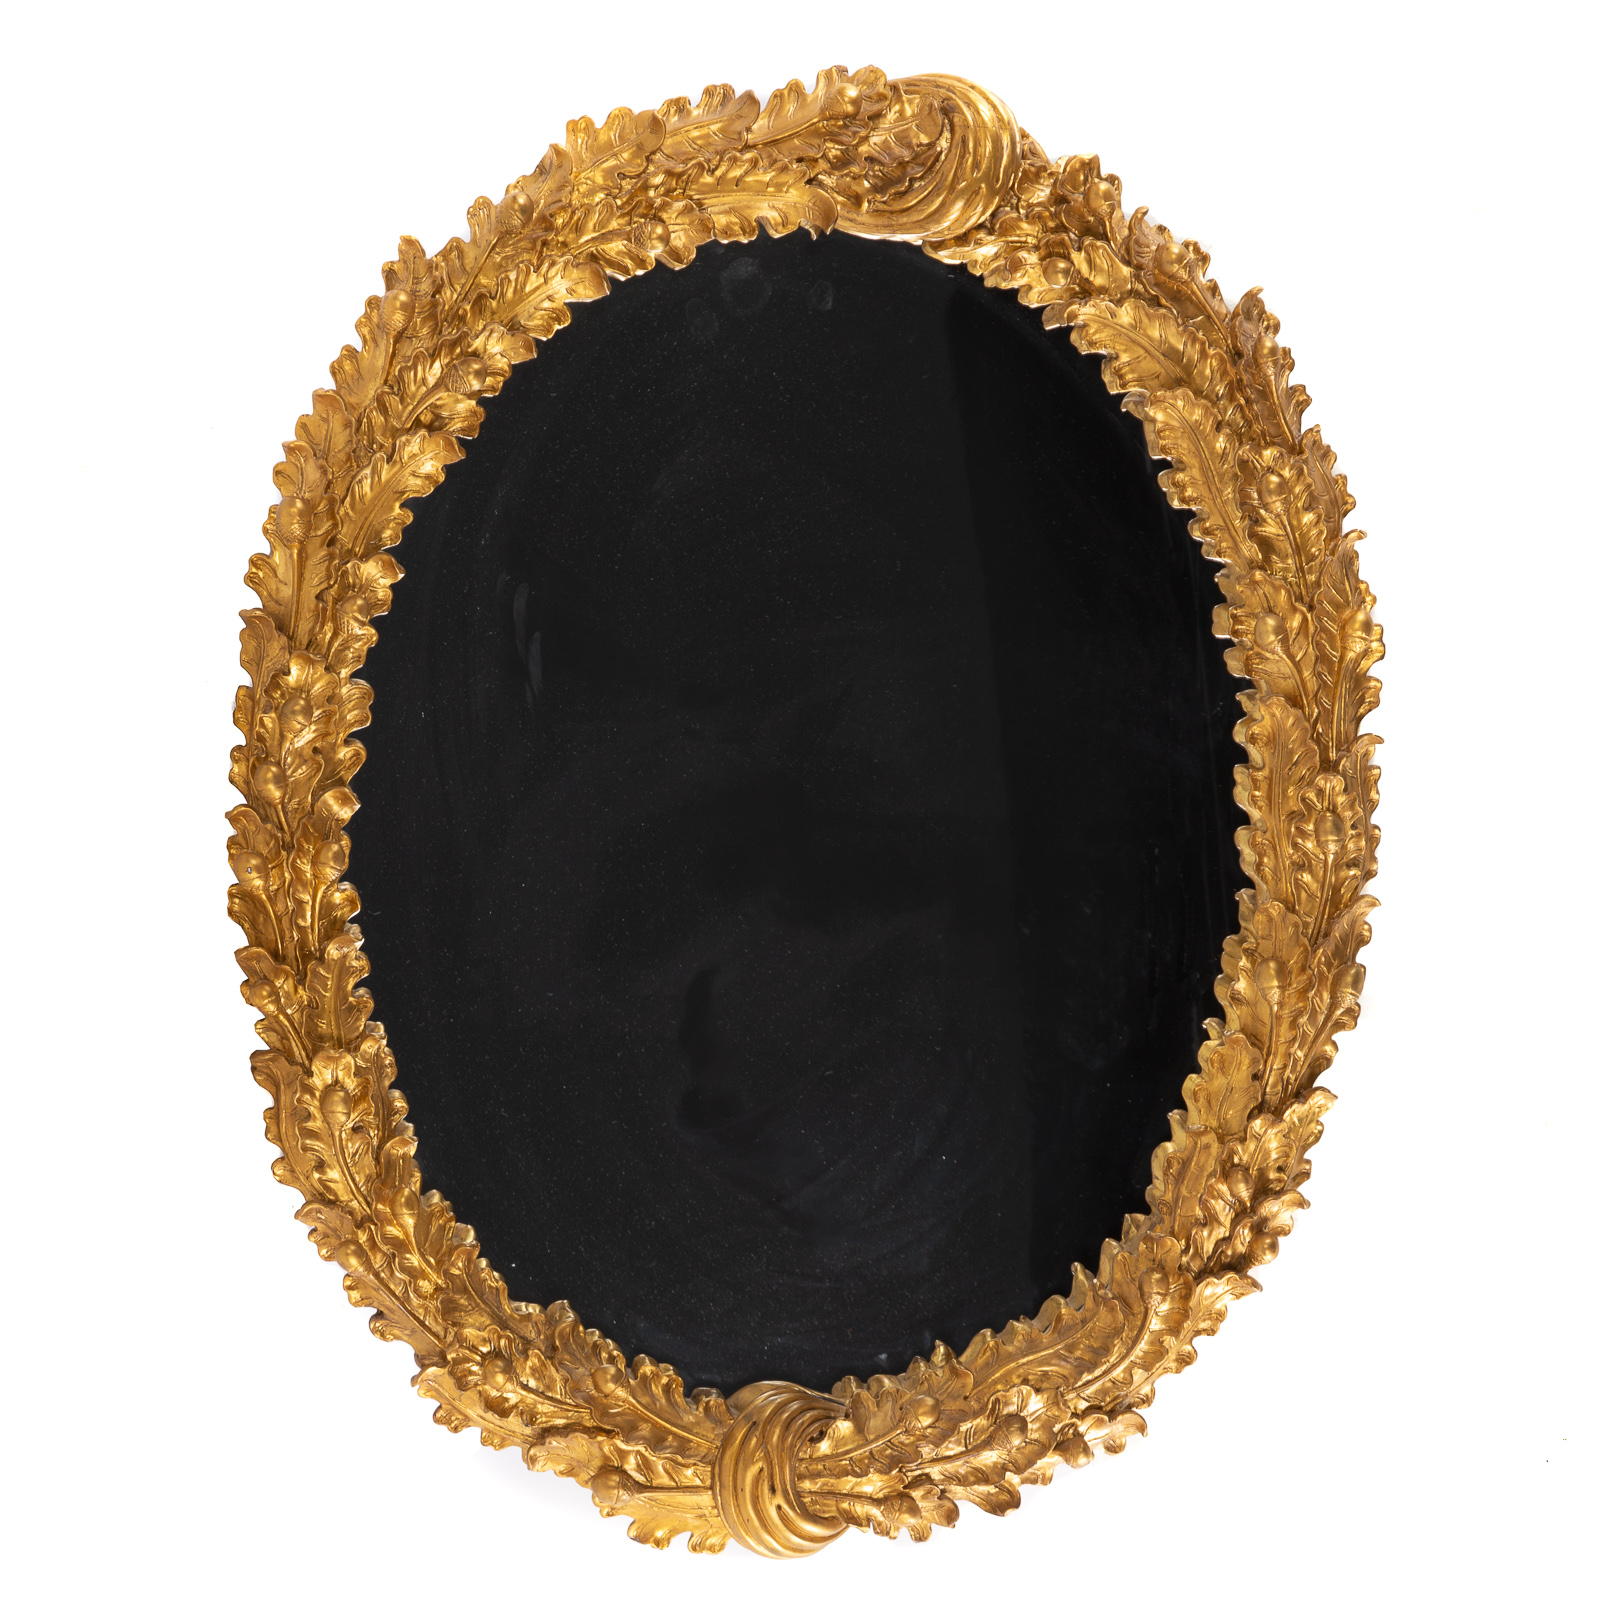 CONTEMPORARY OVAL GILTWOOD MIRROR 36a4ed